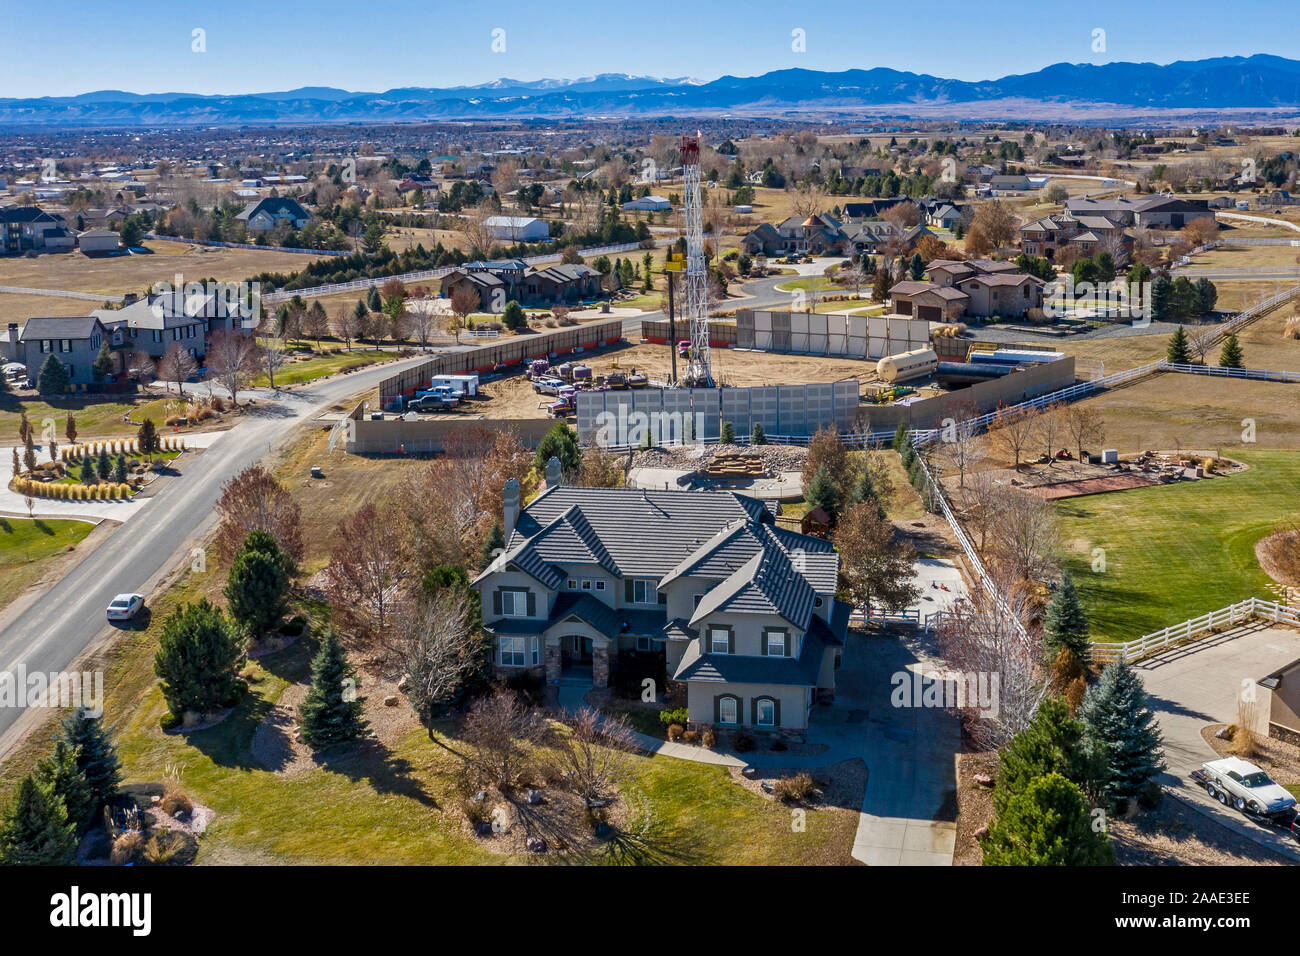 Broomfield, Colorado - An oil drilling rig next to homes in a fast-growing suburb of Denver. Concerned about climate change and health impacts, anti-d Stock Photo